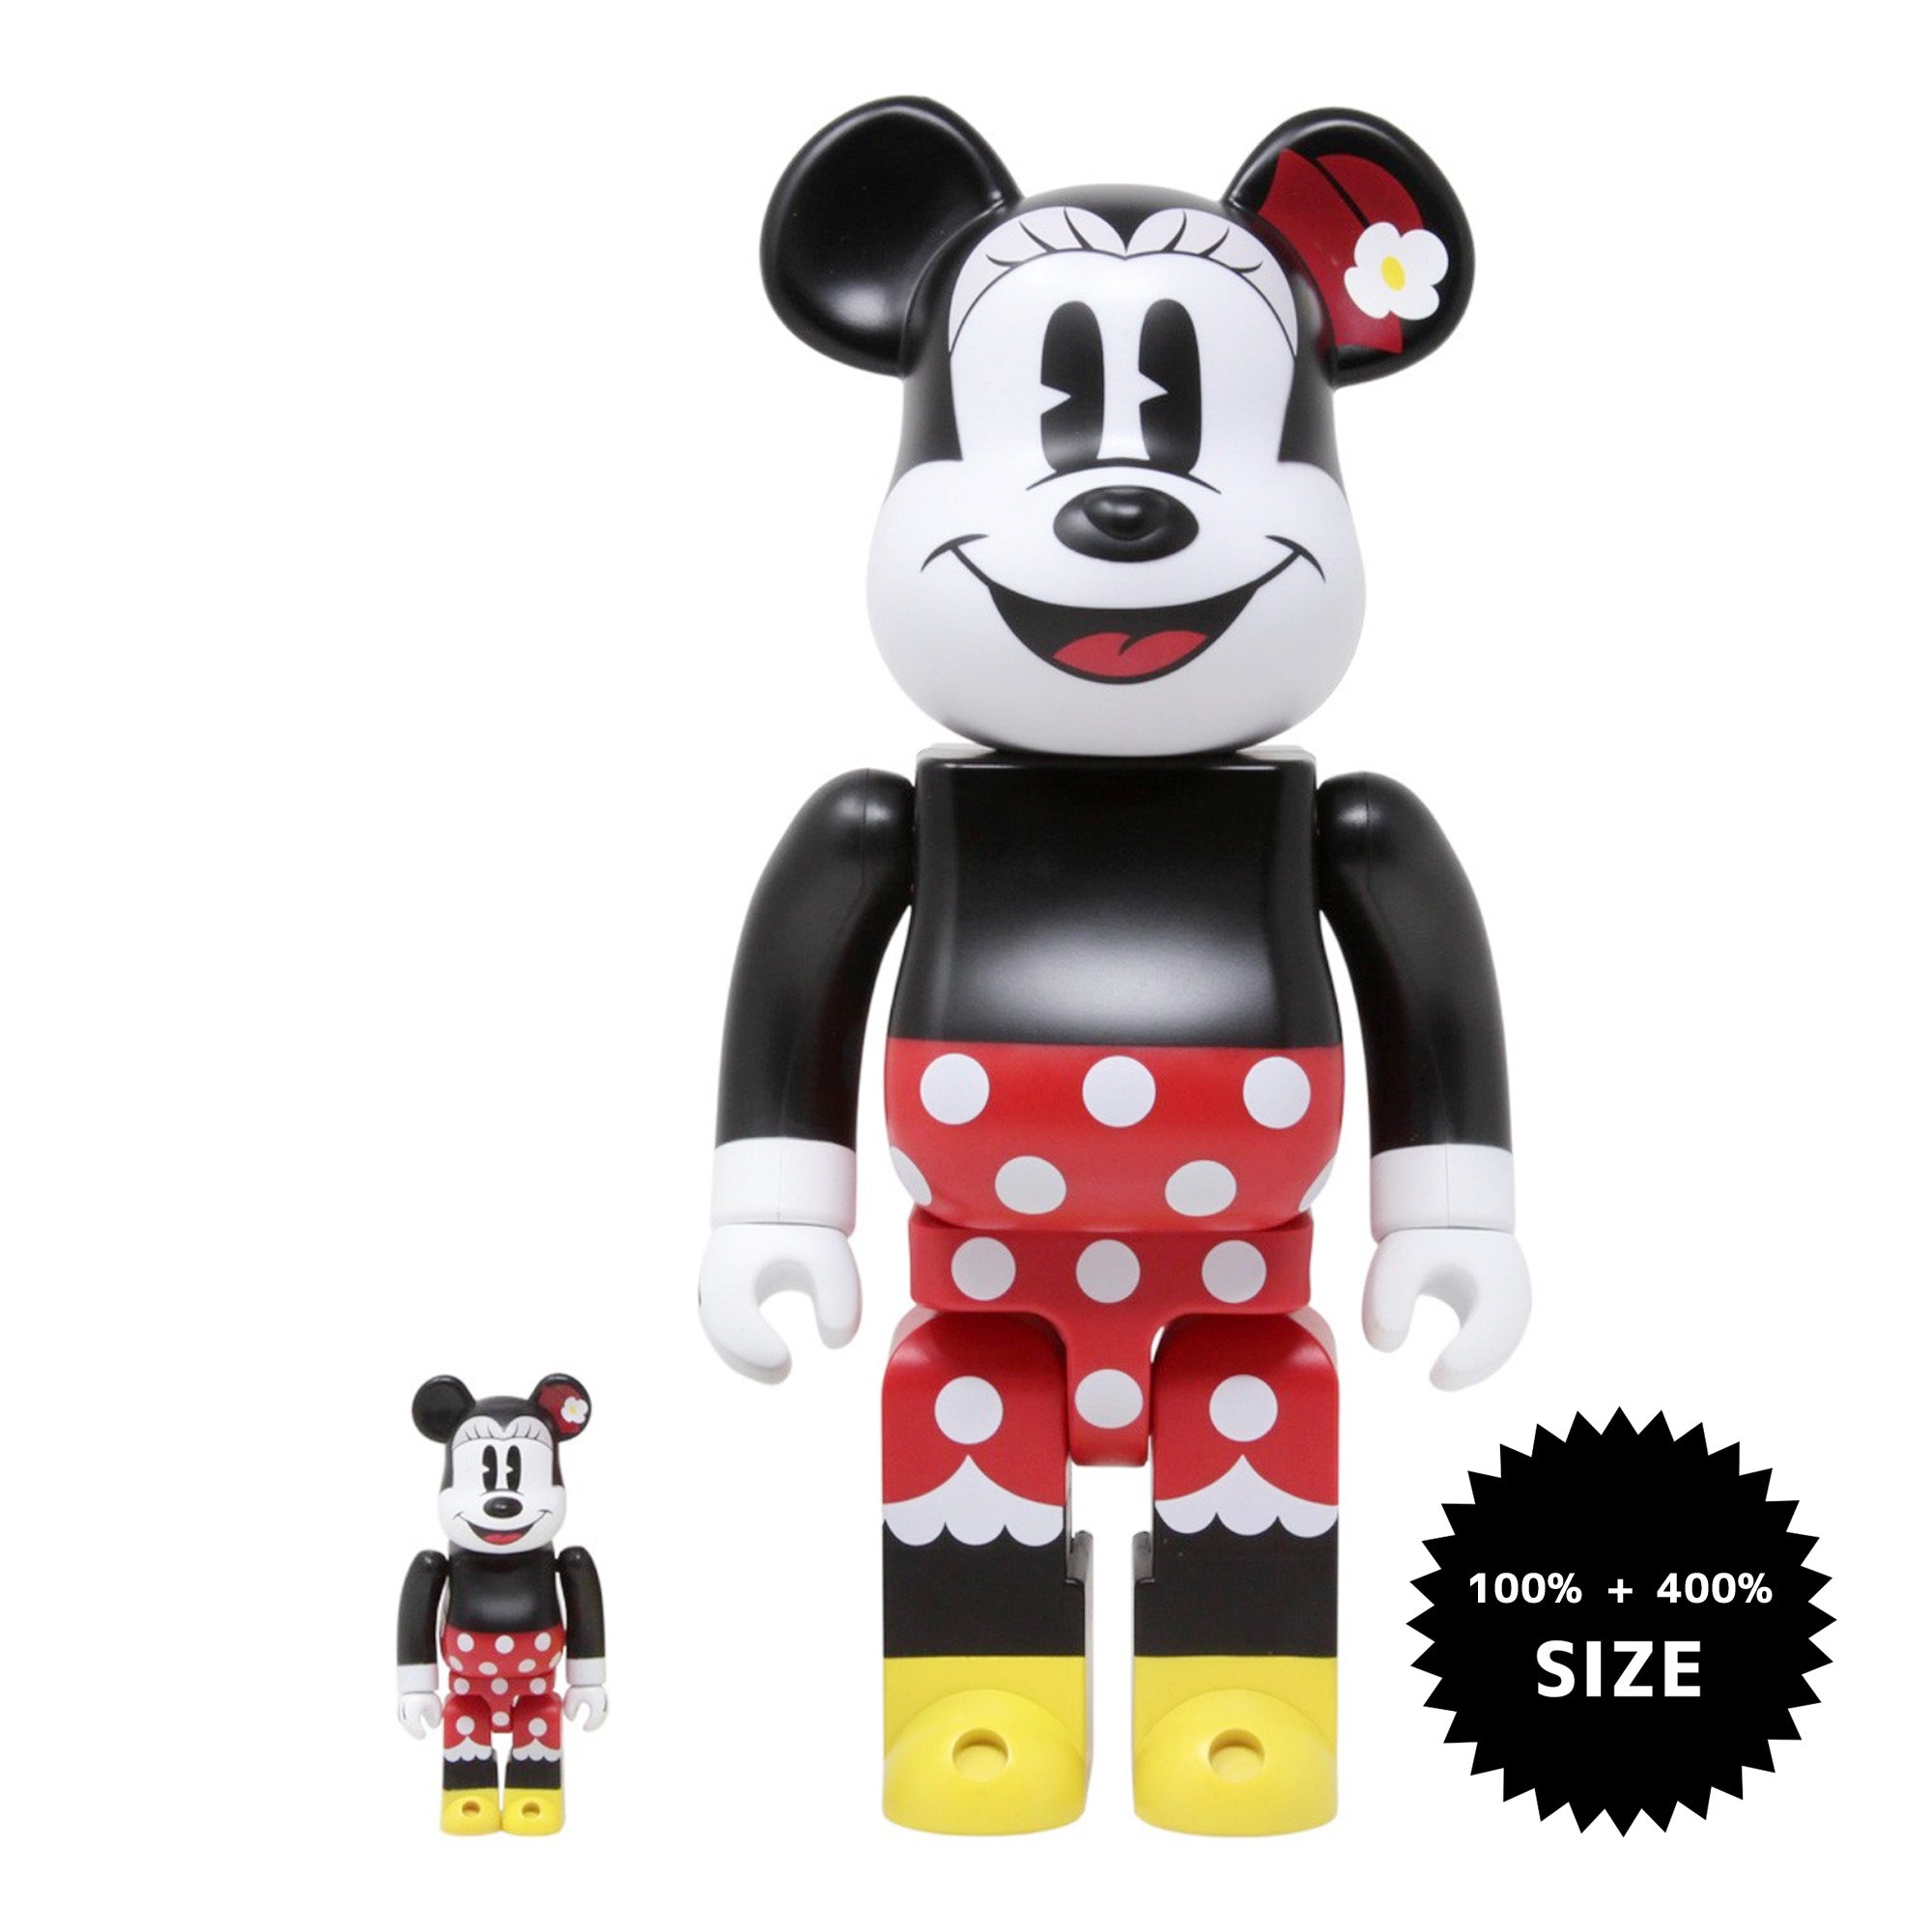 MEDICOM TOY: BE@RBRICK - Minnie Mouse 100% & 400% – TOY TOKYO